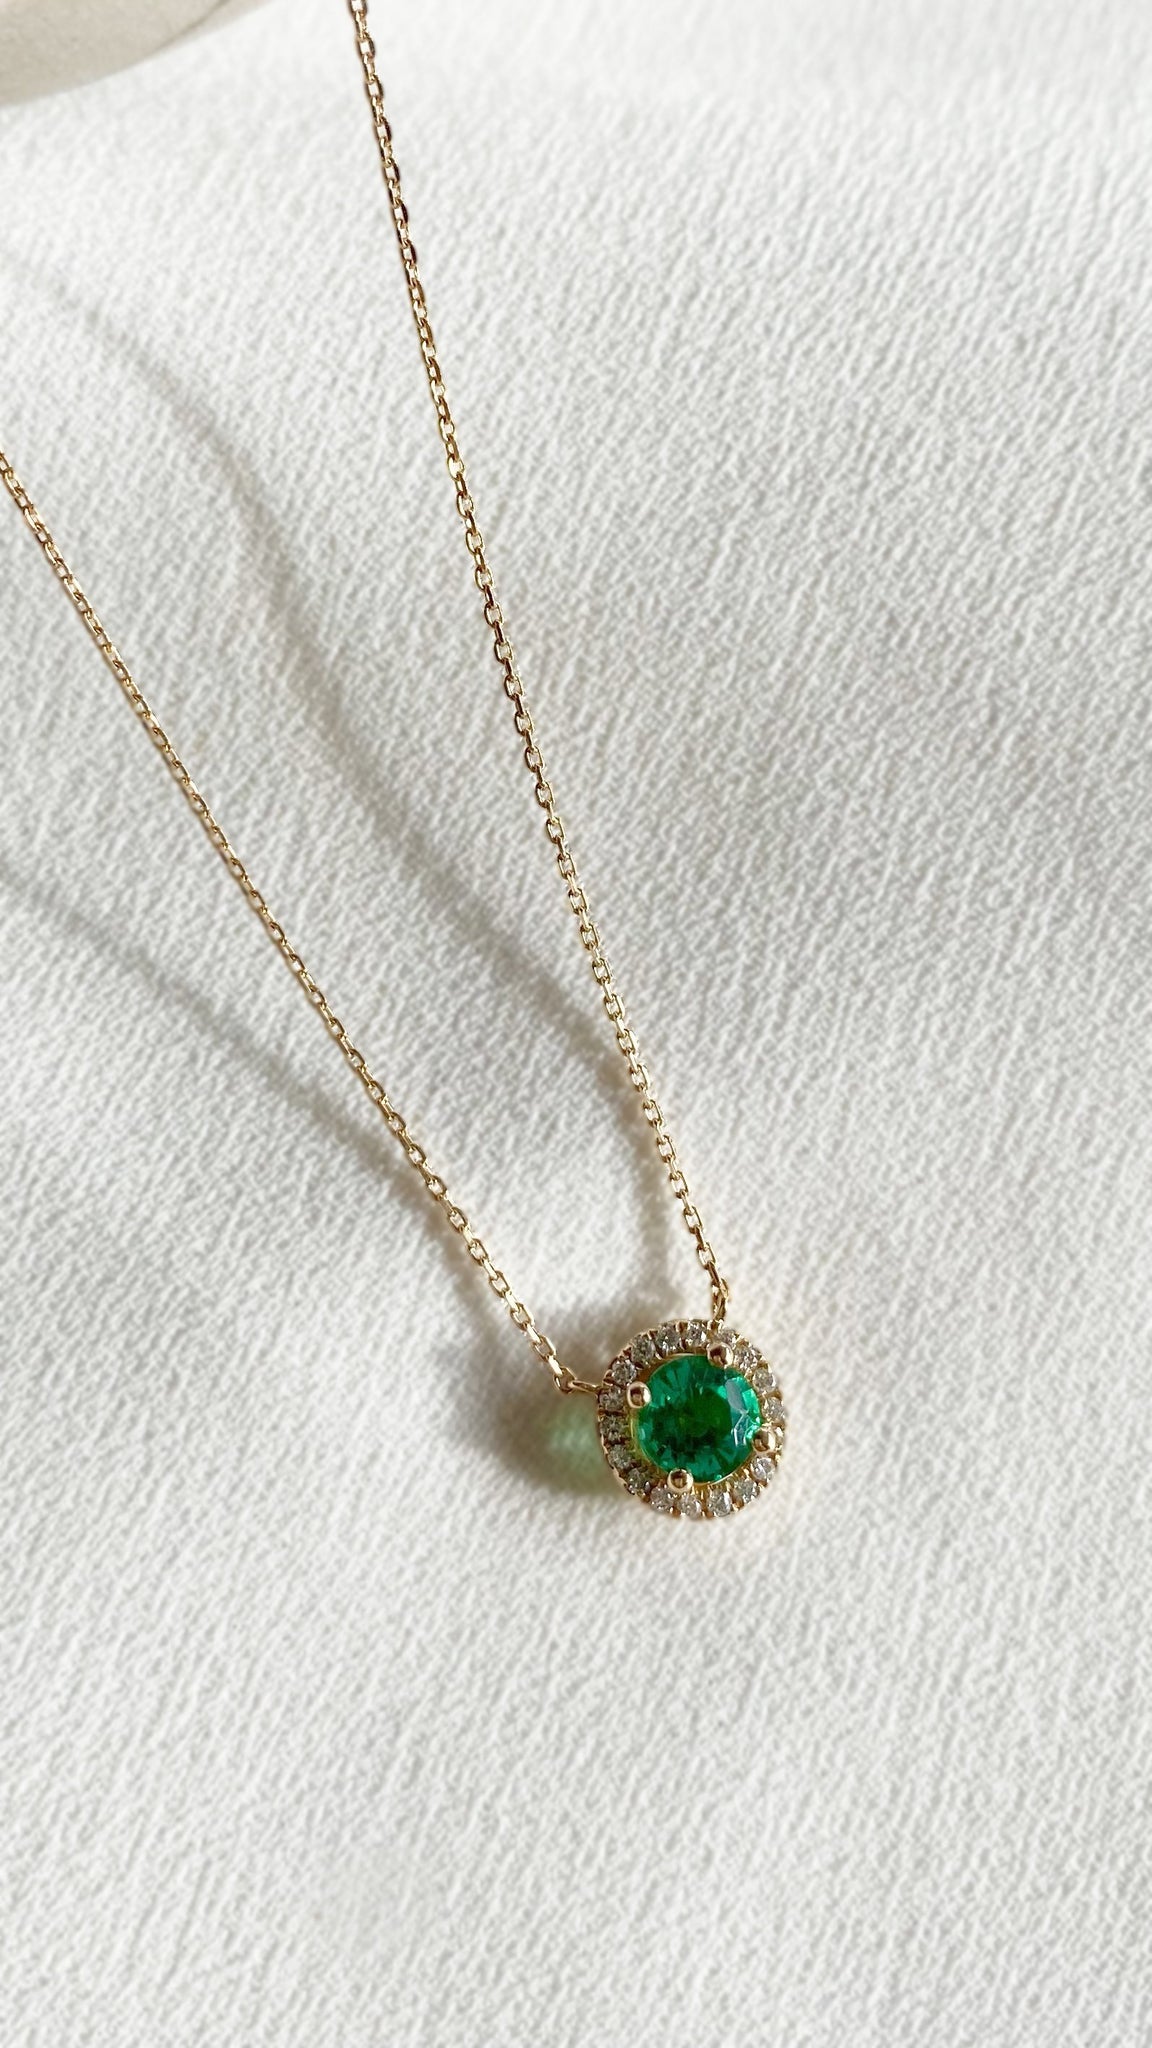 Cory Necklace 0.50ct 18K Yellow Gold Emerald